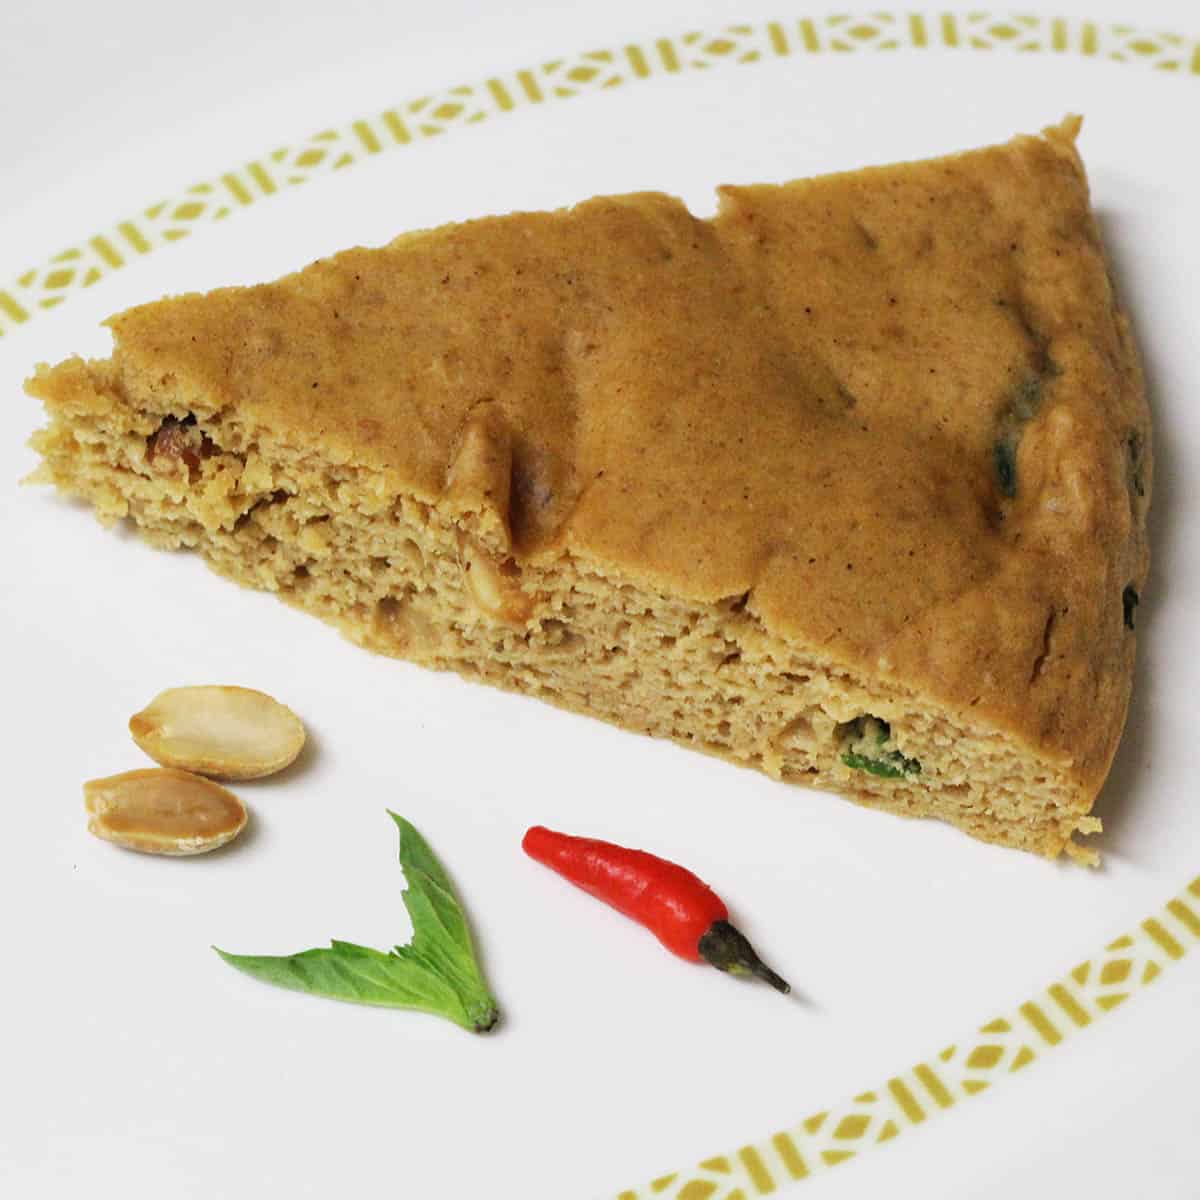 slice of thai peanut protein cake with a couple of peanut halves, a piece of thai basil, and a tiny red pepper on a white plate